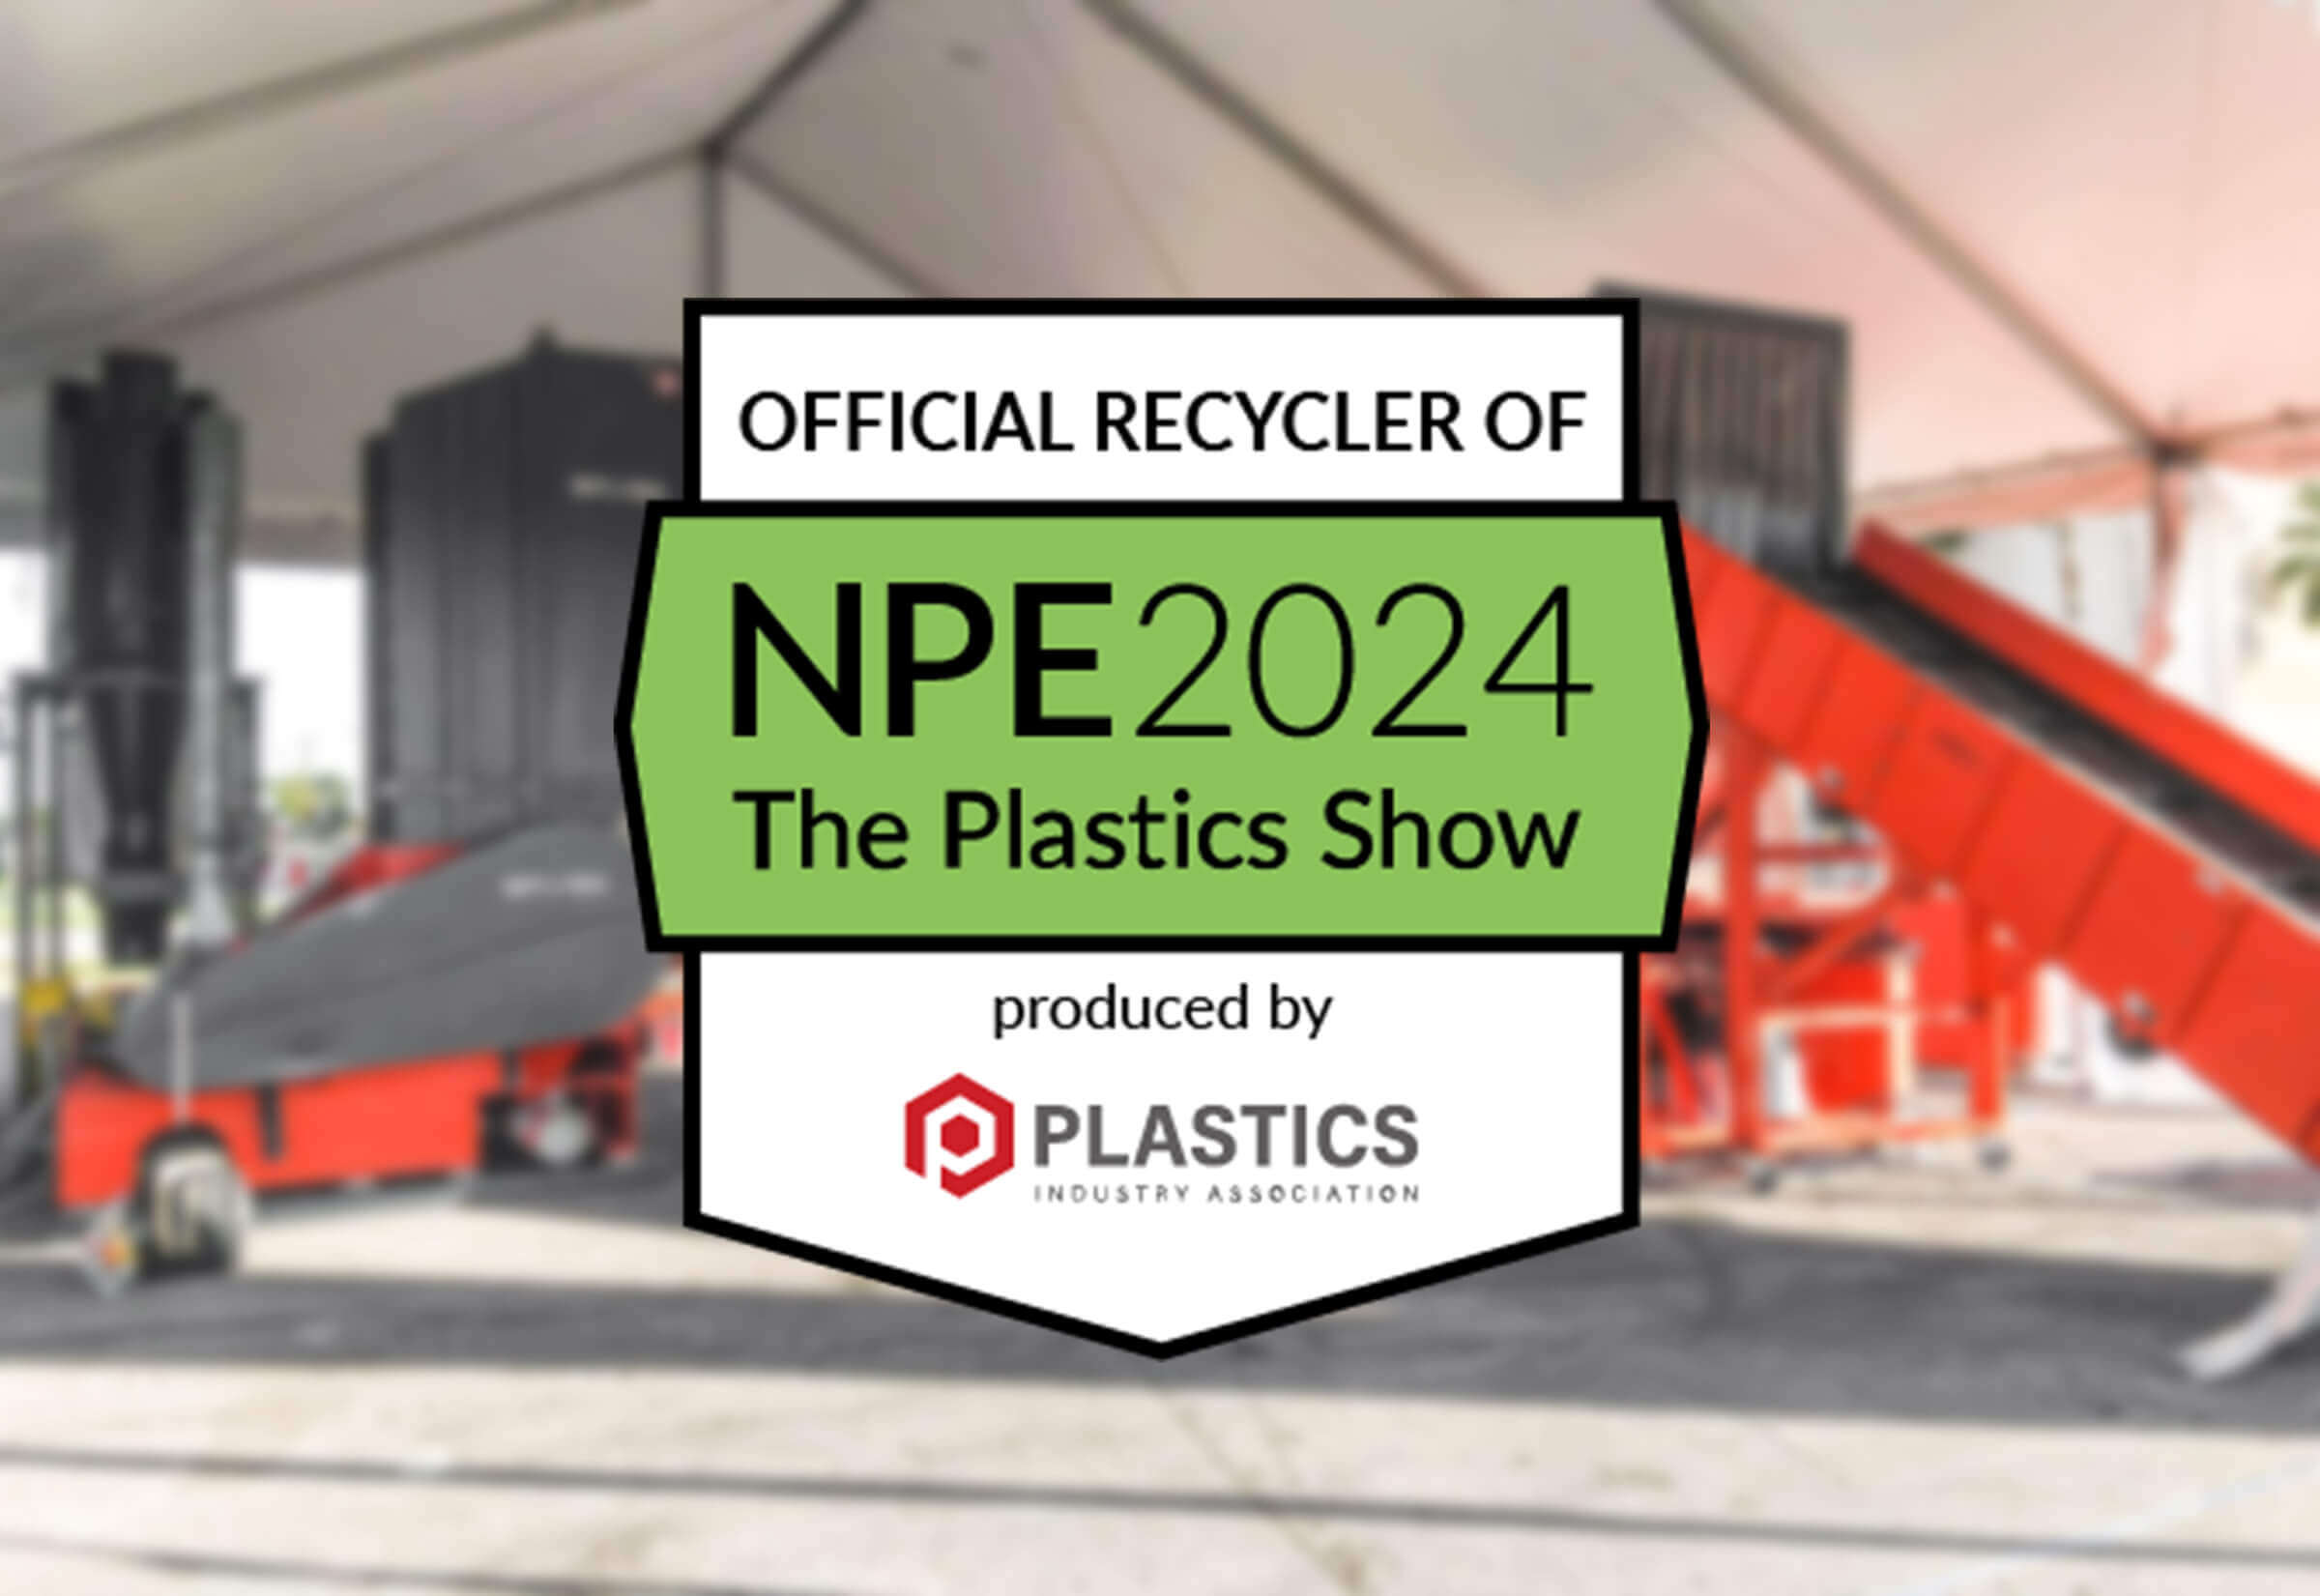 WEIMA Named Official Recycler of NPE2024 The Plastics Show